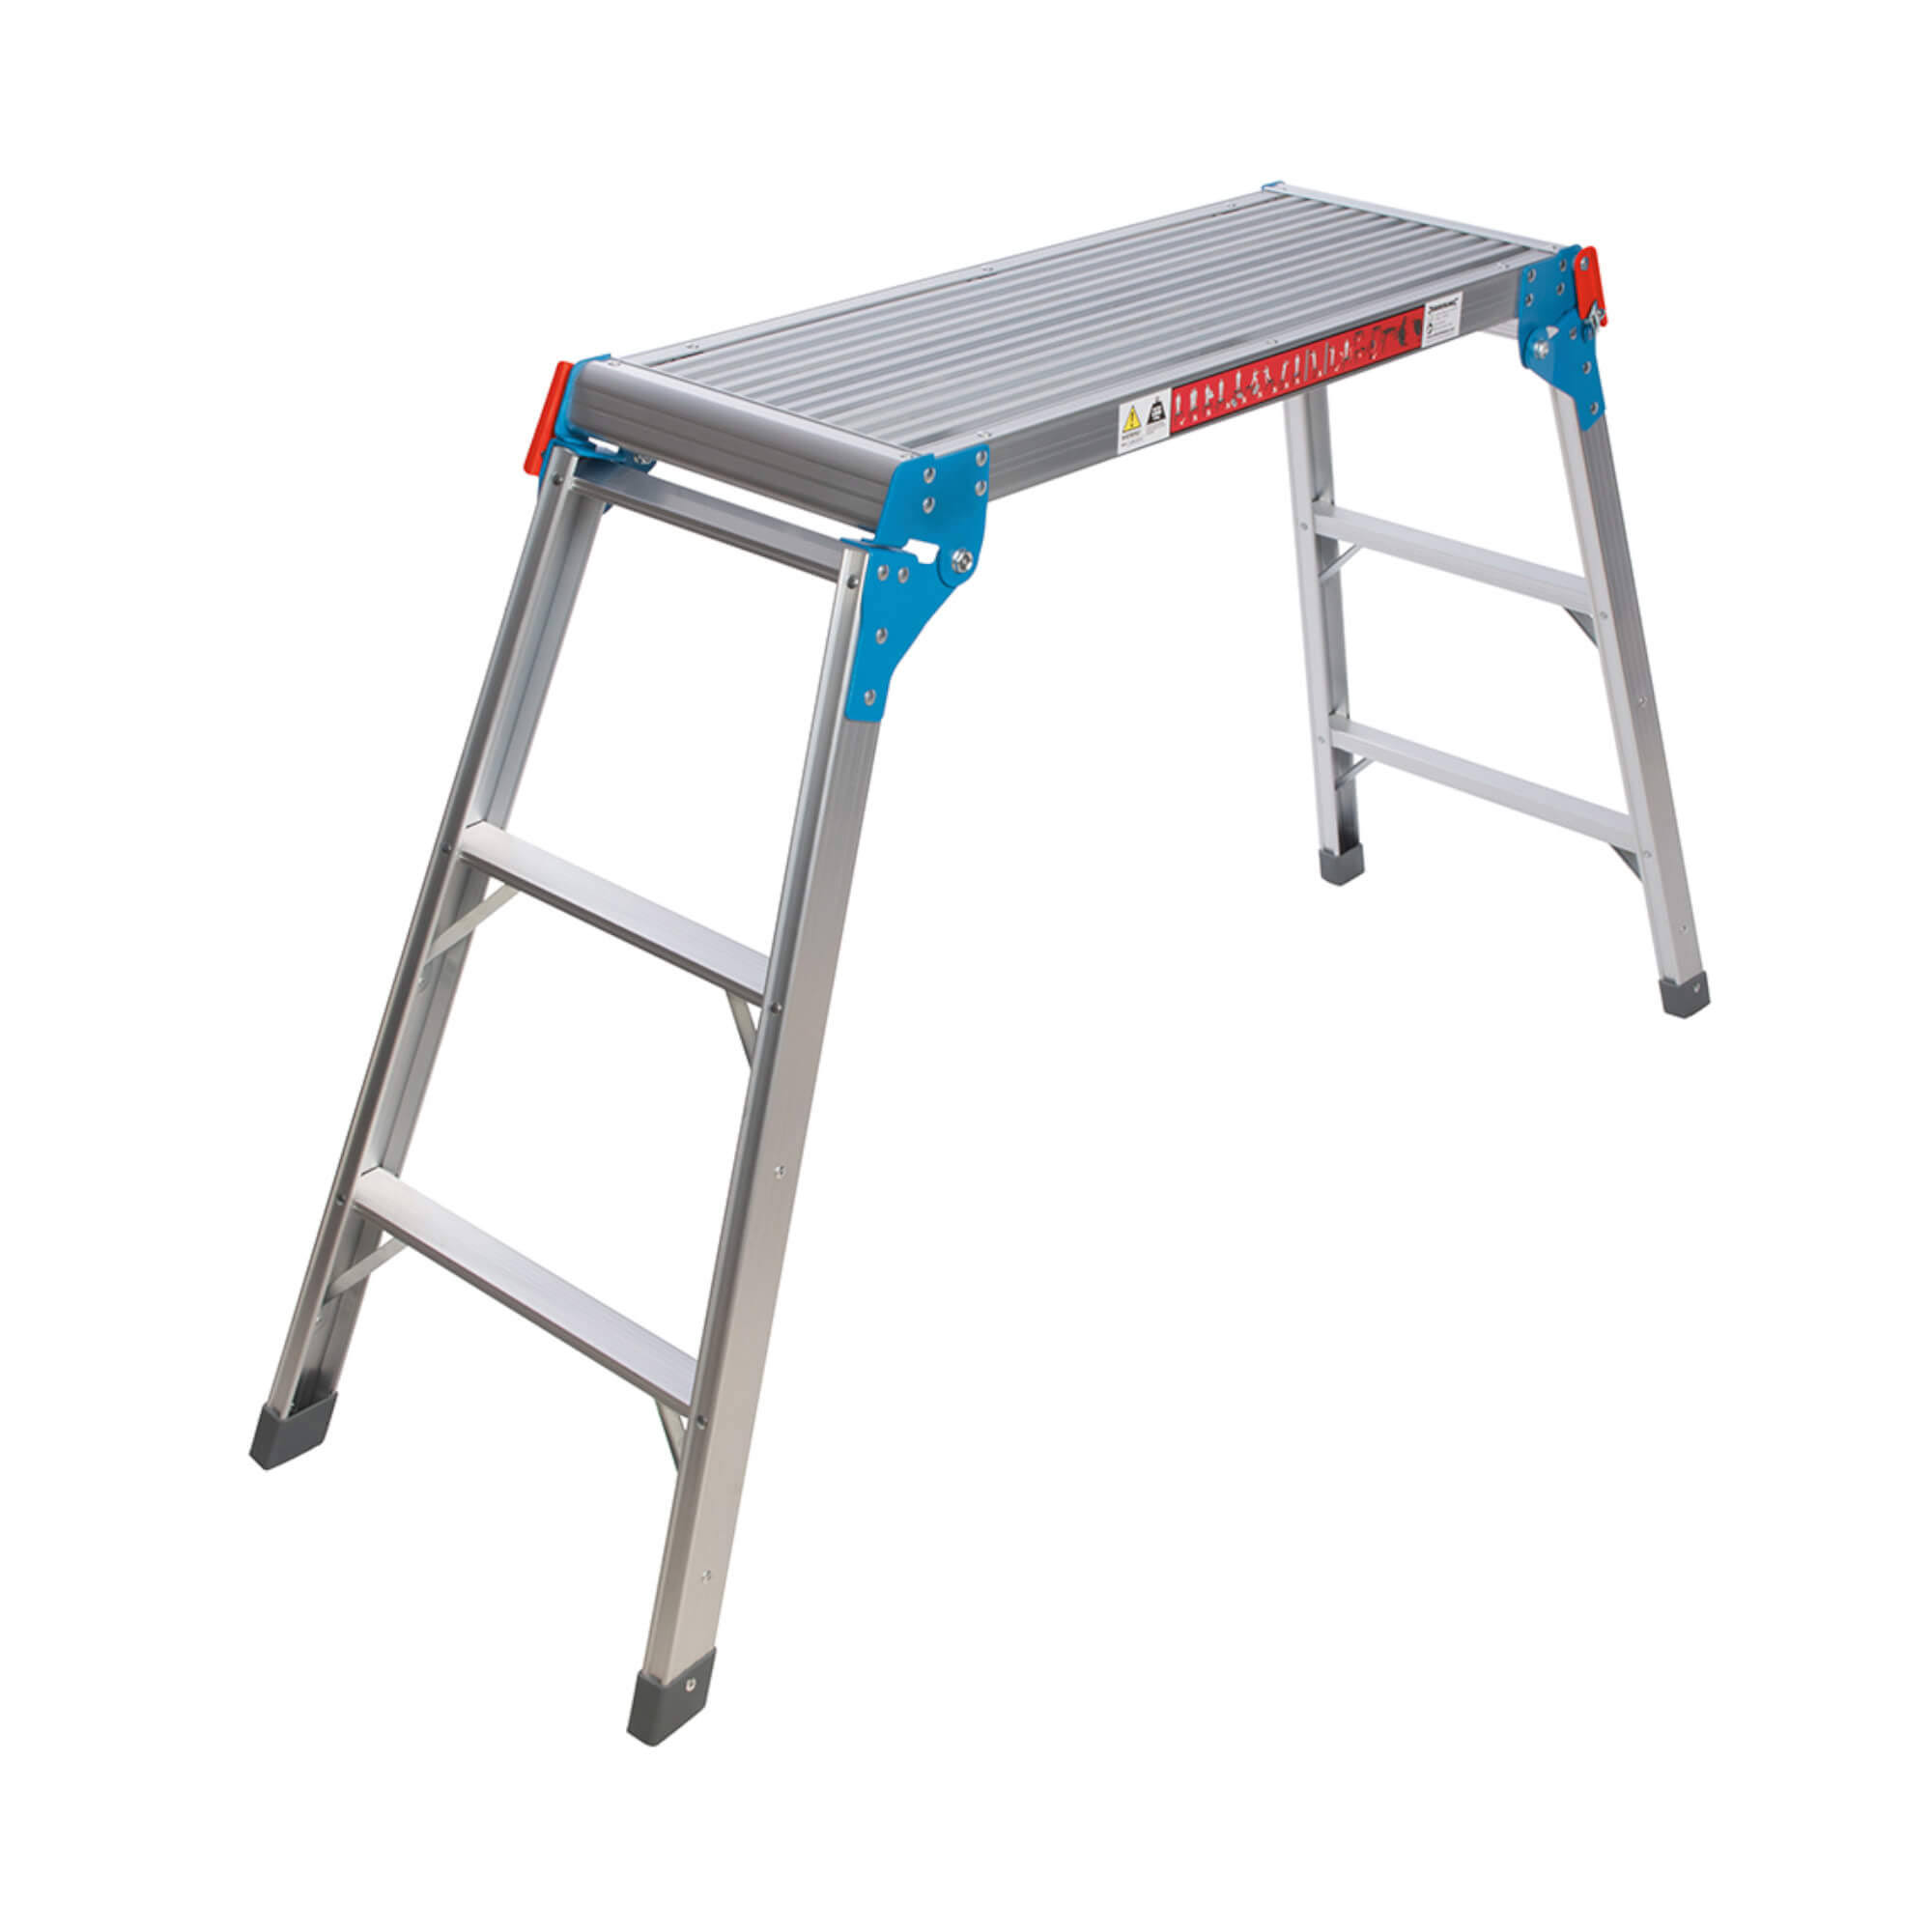 Silverline Tools 537366 150Kg Step-Up Platform - Silver with Blue Hinges and Black Feet